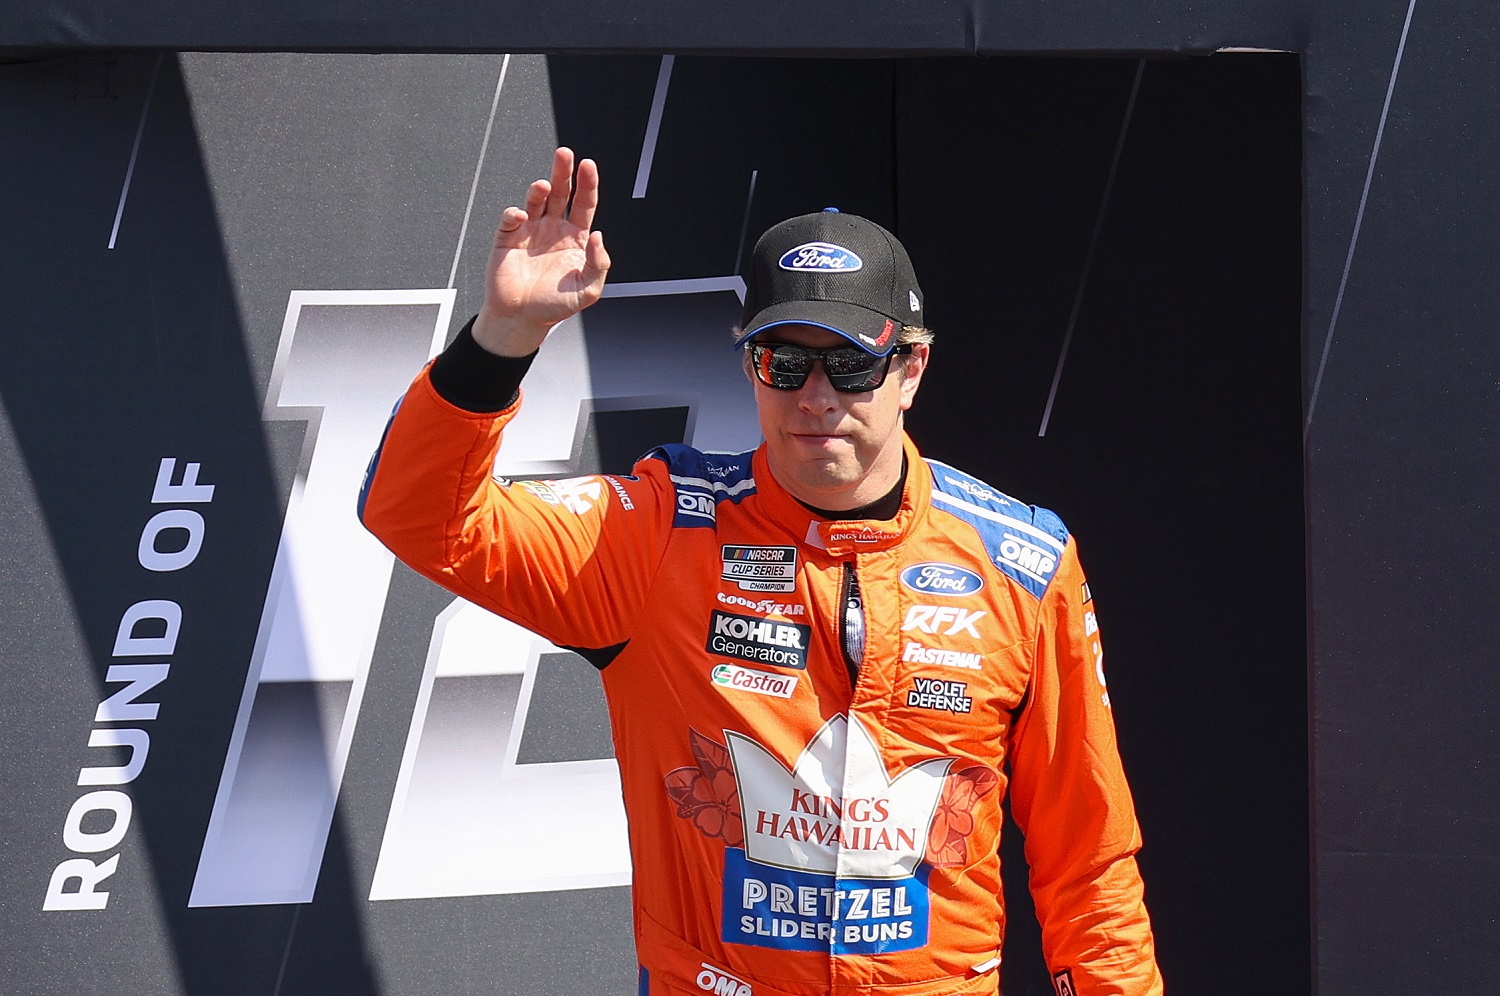 Brad Keselowski waves to fans during driver intros at the NASCAR Cup Series Auto Trader EchoPark Automotive 500 at Texas Motor Speedway on Sept. 25, 2022.